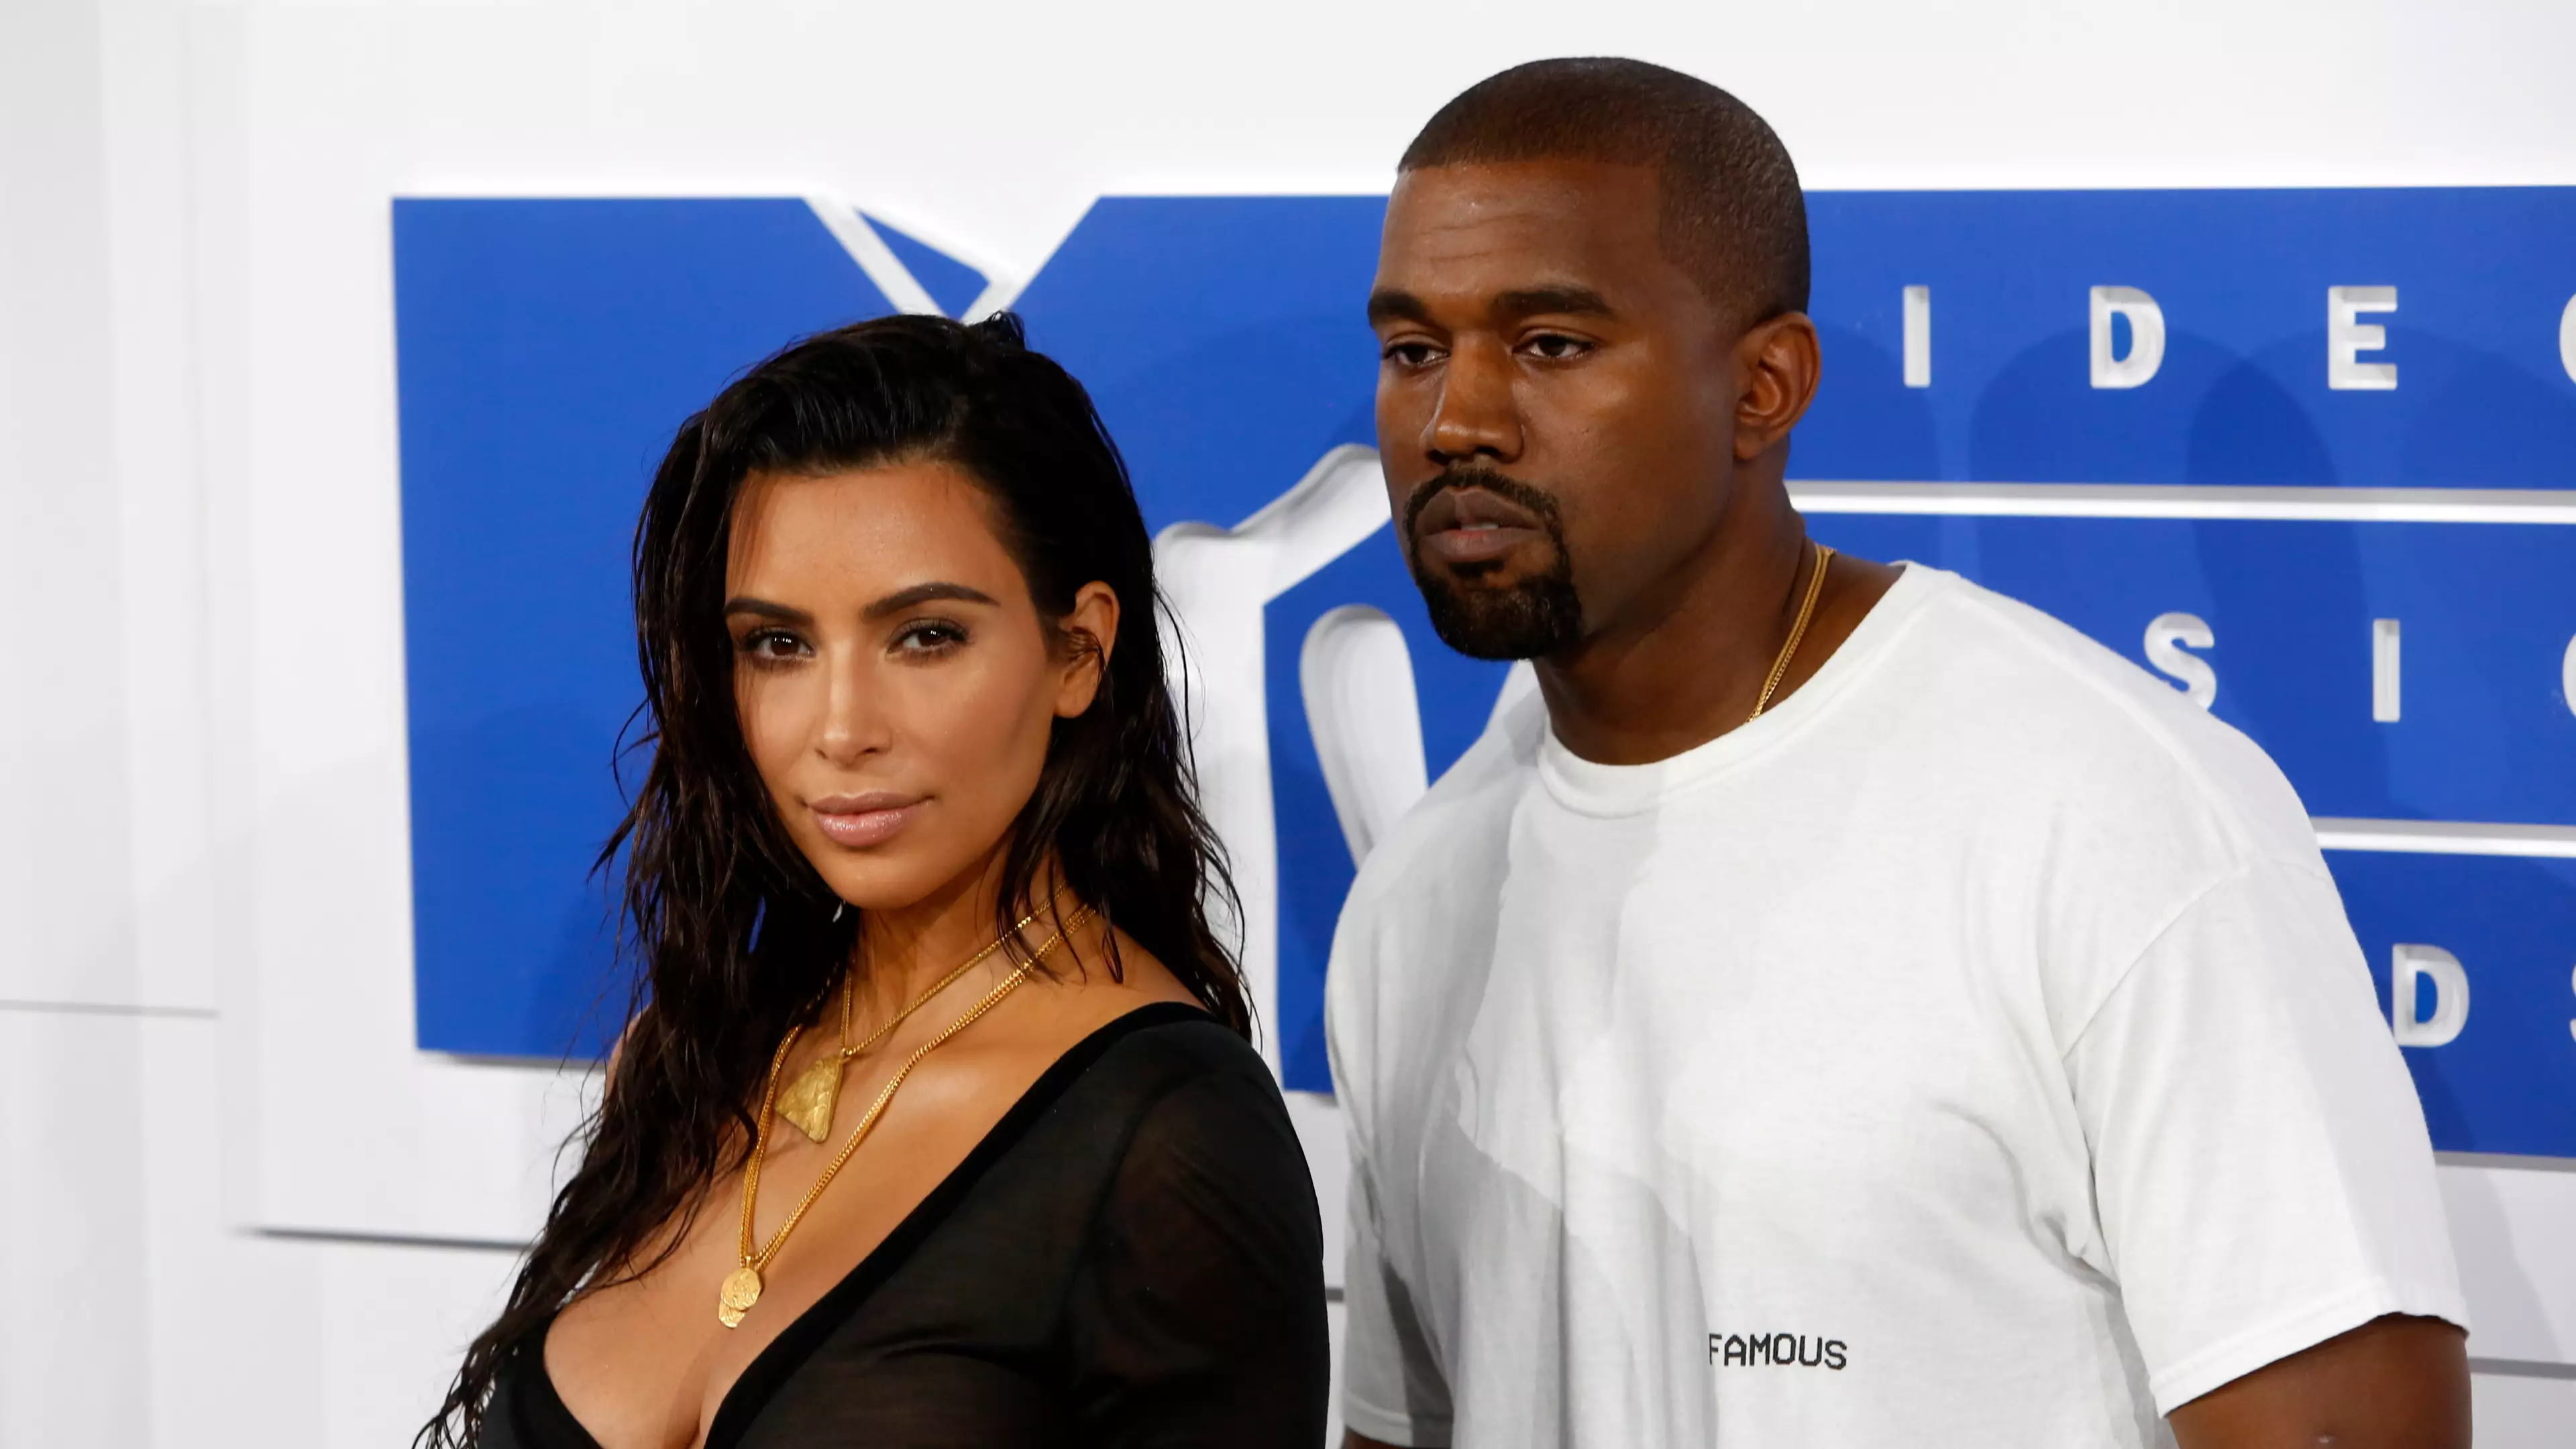 Kim Kardashian And Kanye West Have Named Their Child Psalm